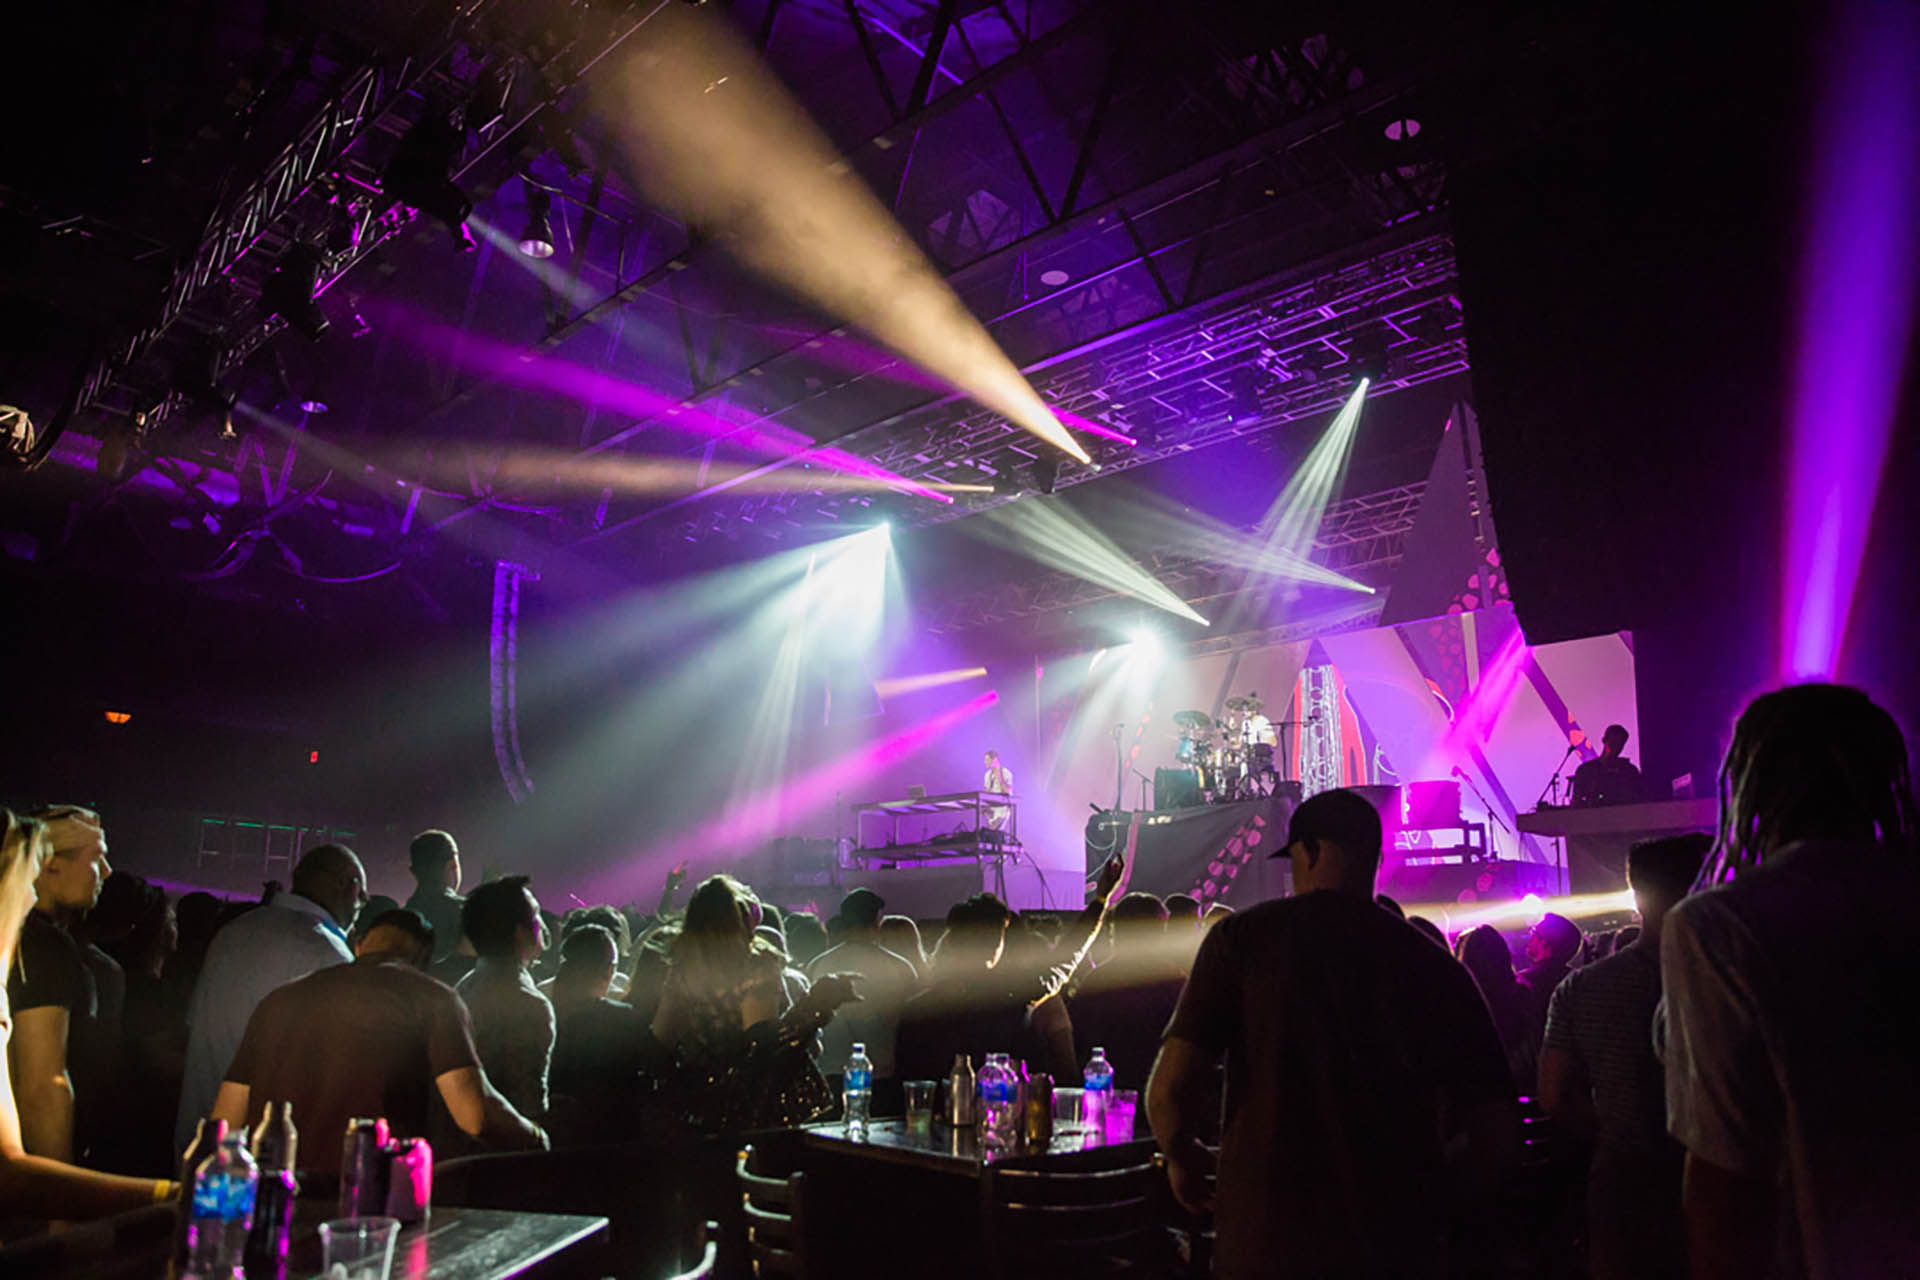 Live music photos of a concert in DFW. The stage is covered in purple light while colorful spotlights point in multiple directions including hightling the audience.